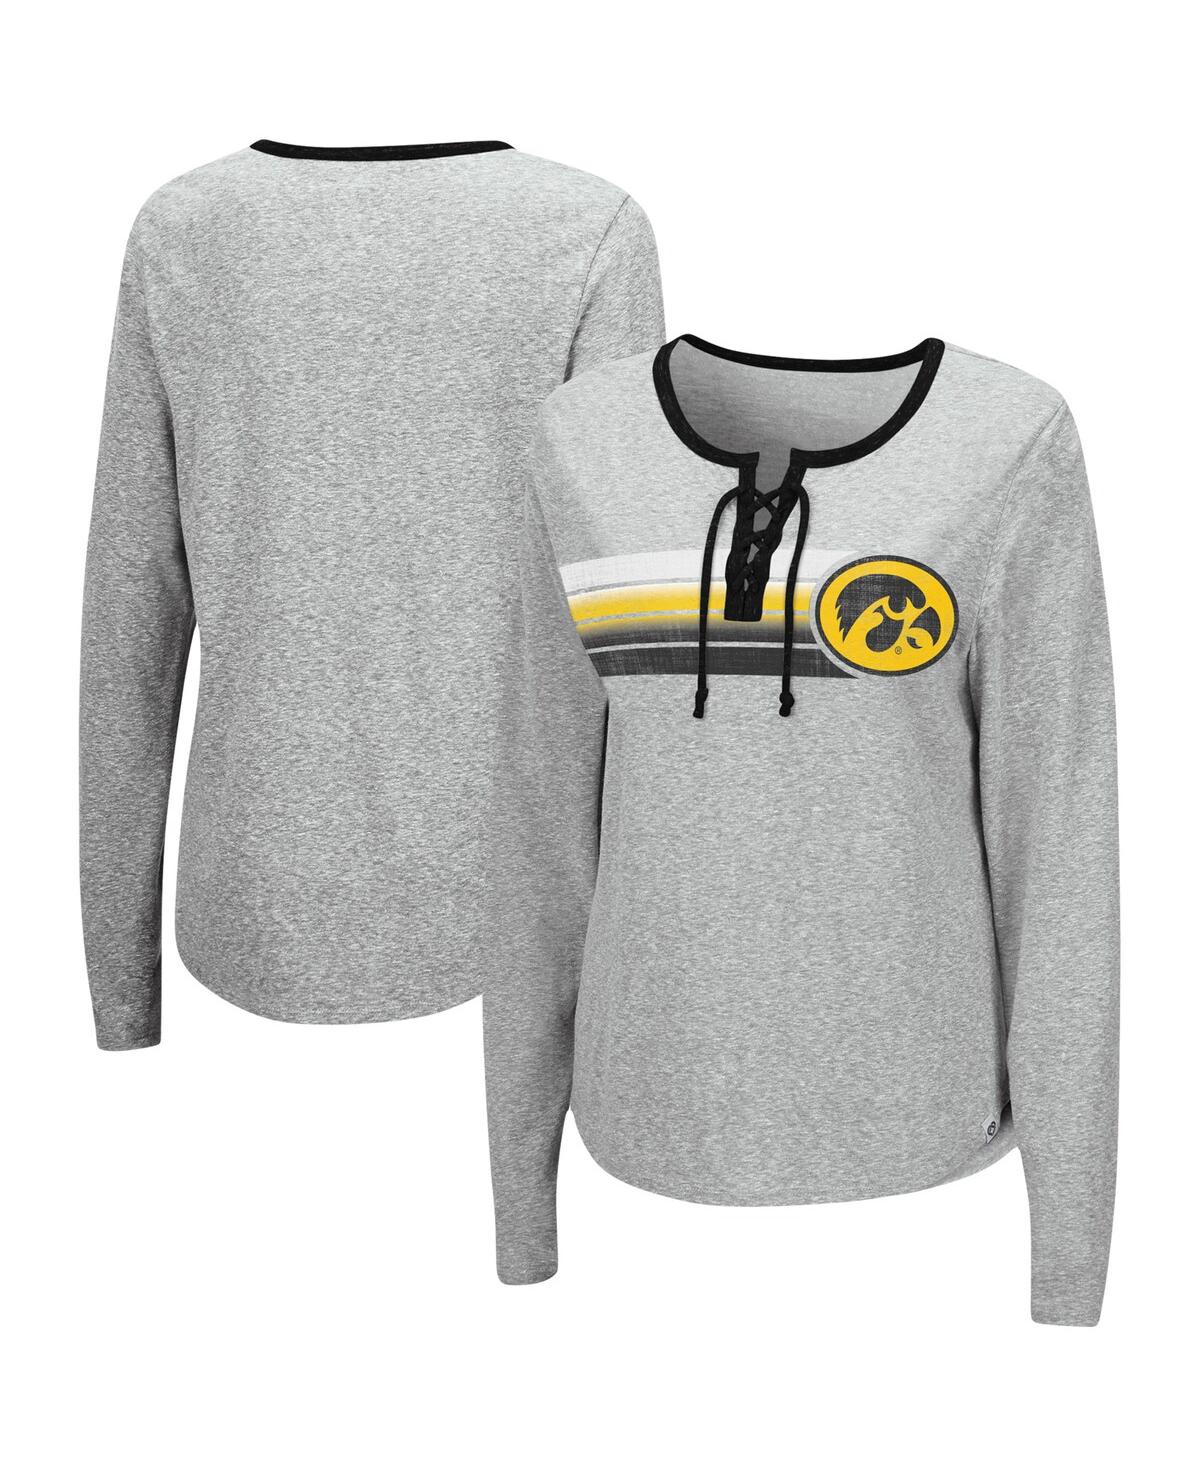 Shop Colosseum Women's  Heathered Gray Iowa Hawkeyes Sundial Tri-blend Long Sleeve Lace-up T-shirt